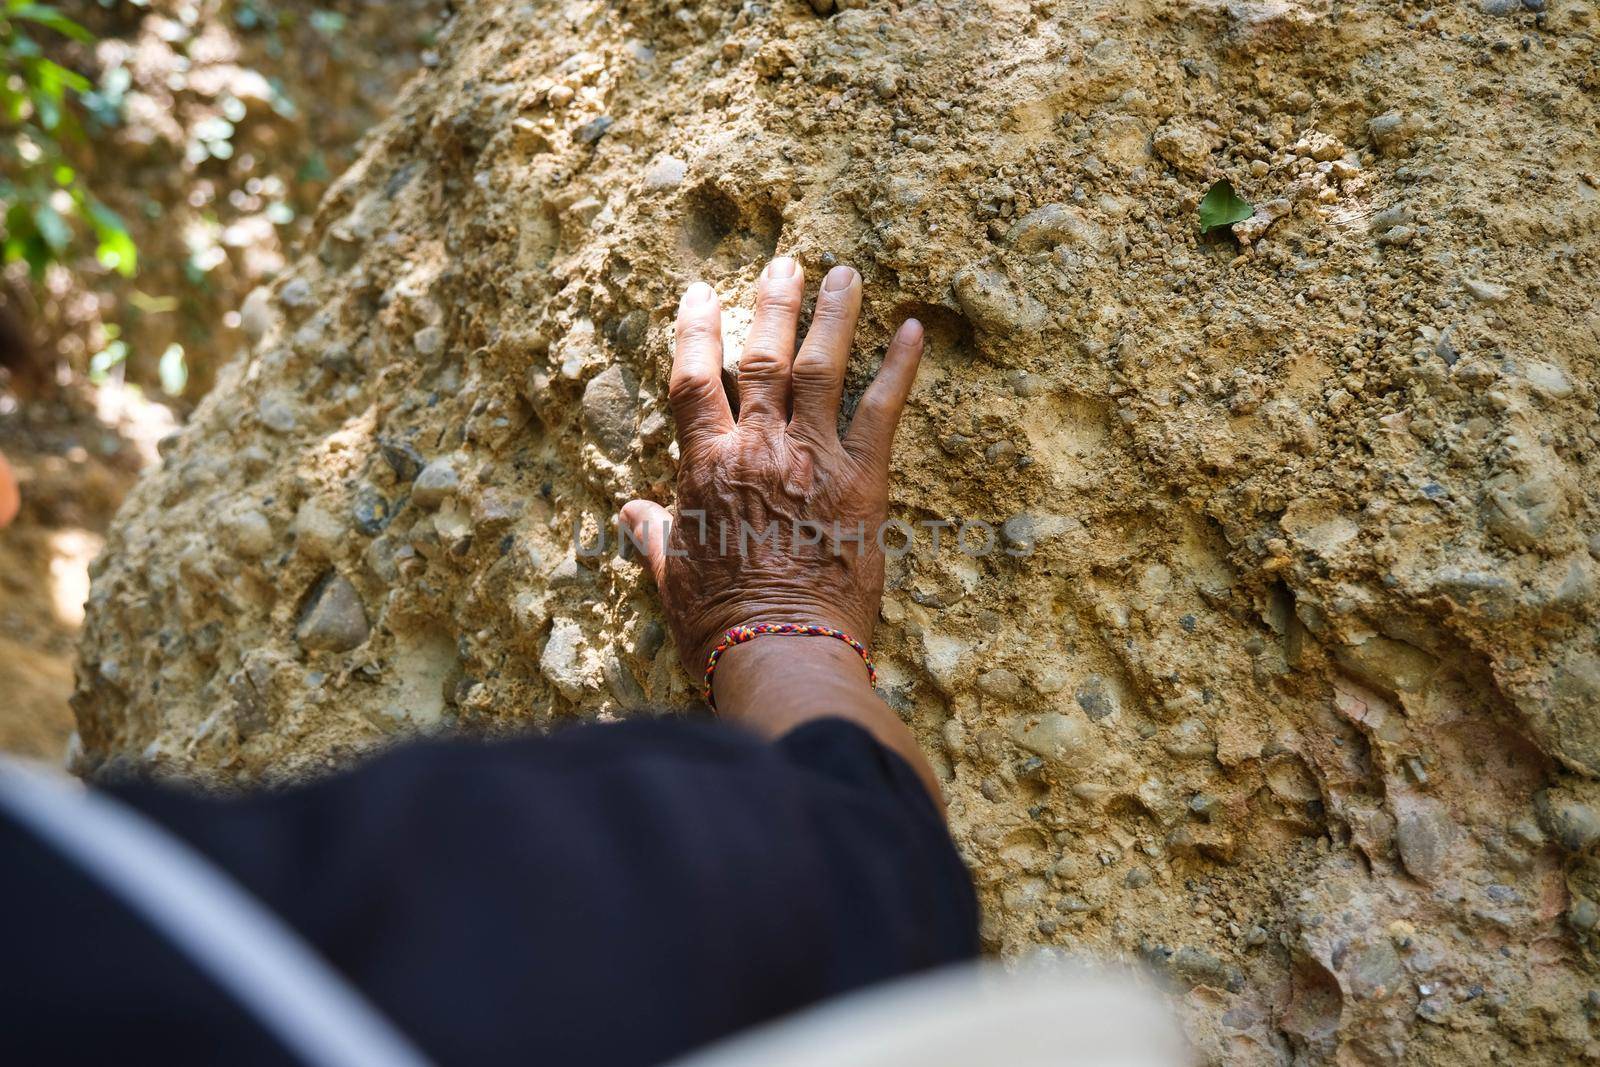 Elderly Asian male geologist researcher touches rocks with his hands to analyze surfaces in Mae Wang Natural Park, Thailand. Exploration Geologist in the Field by TEERASAK